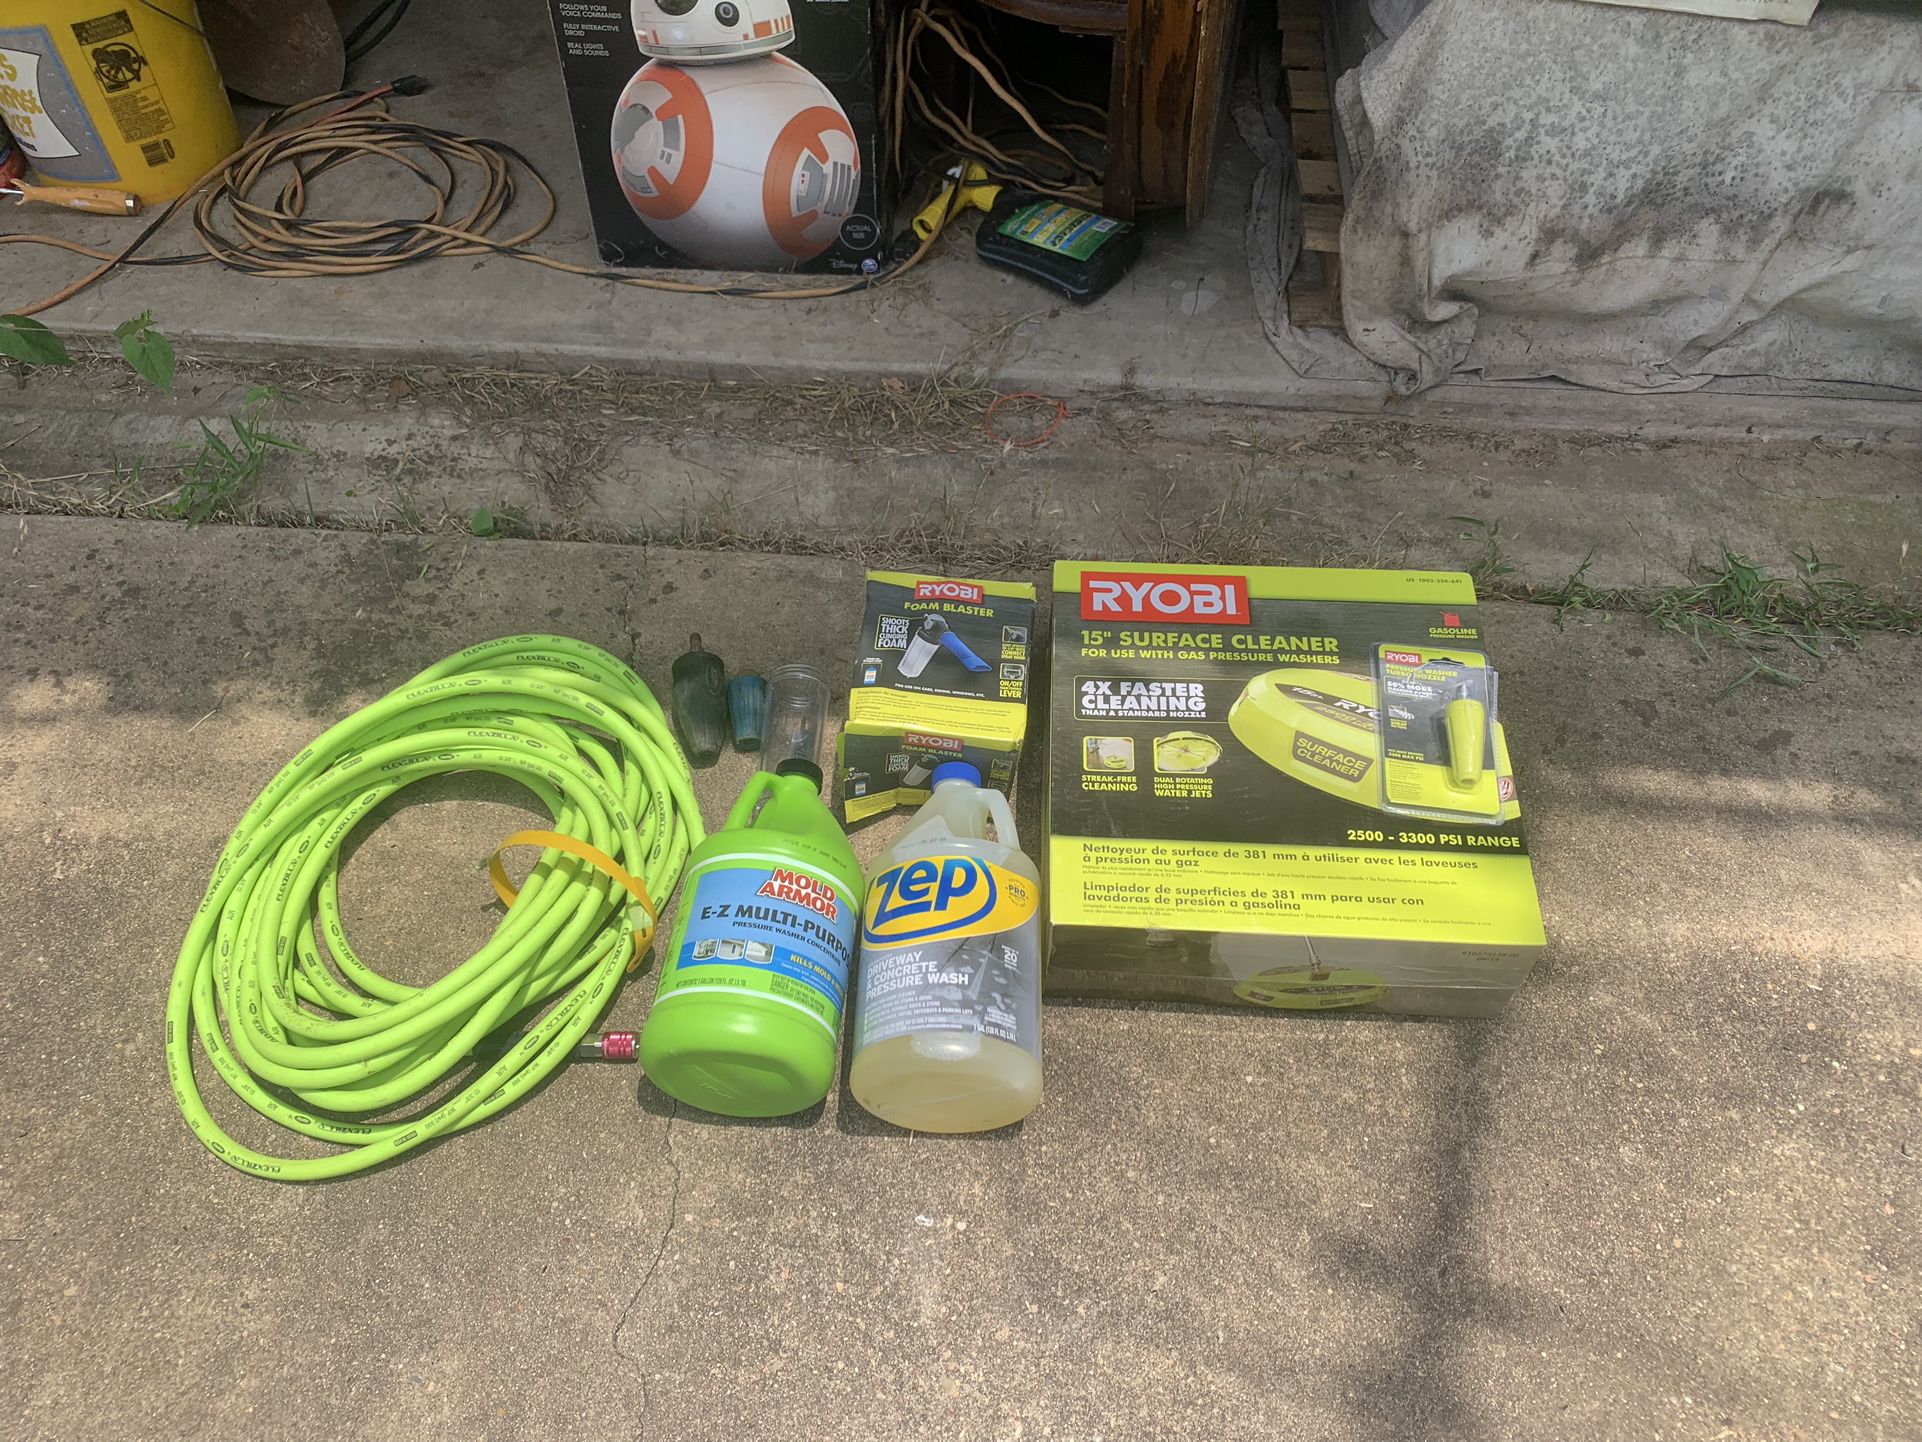 RYOBI PRESSURE WASHER ACCESSORIES (I’d Like To Get Over $100, If You Want It Send Me An Offer)